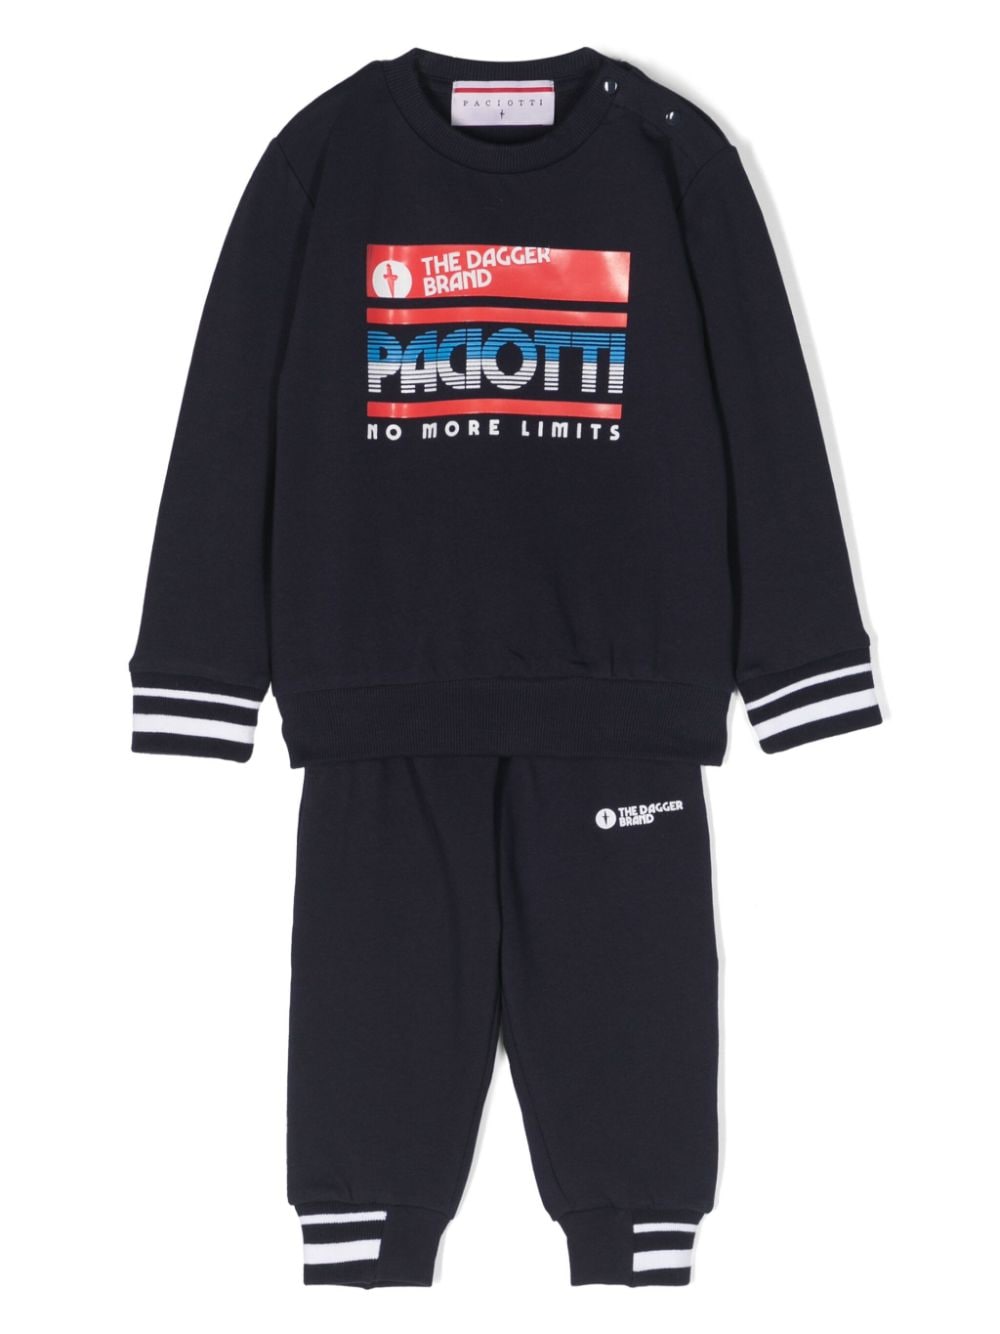 Blue sports suit for boys with logo